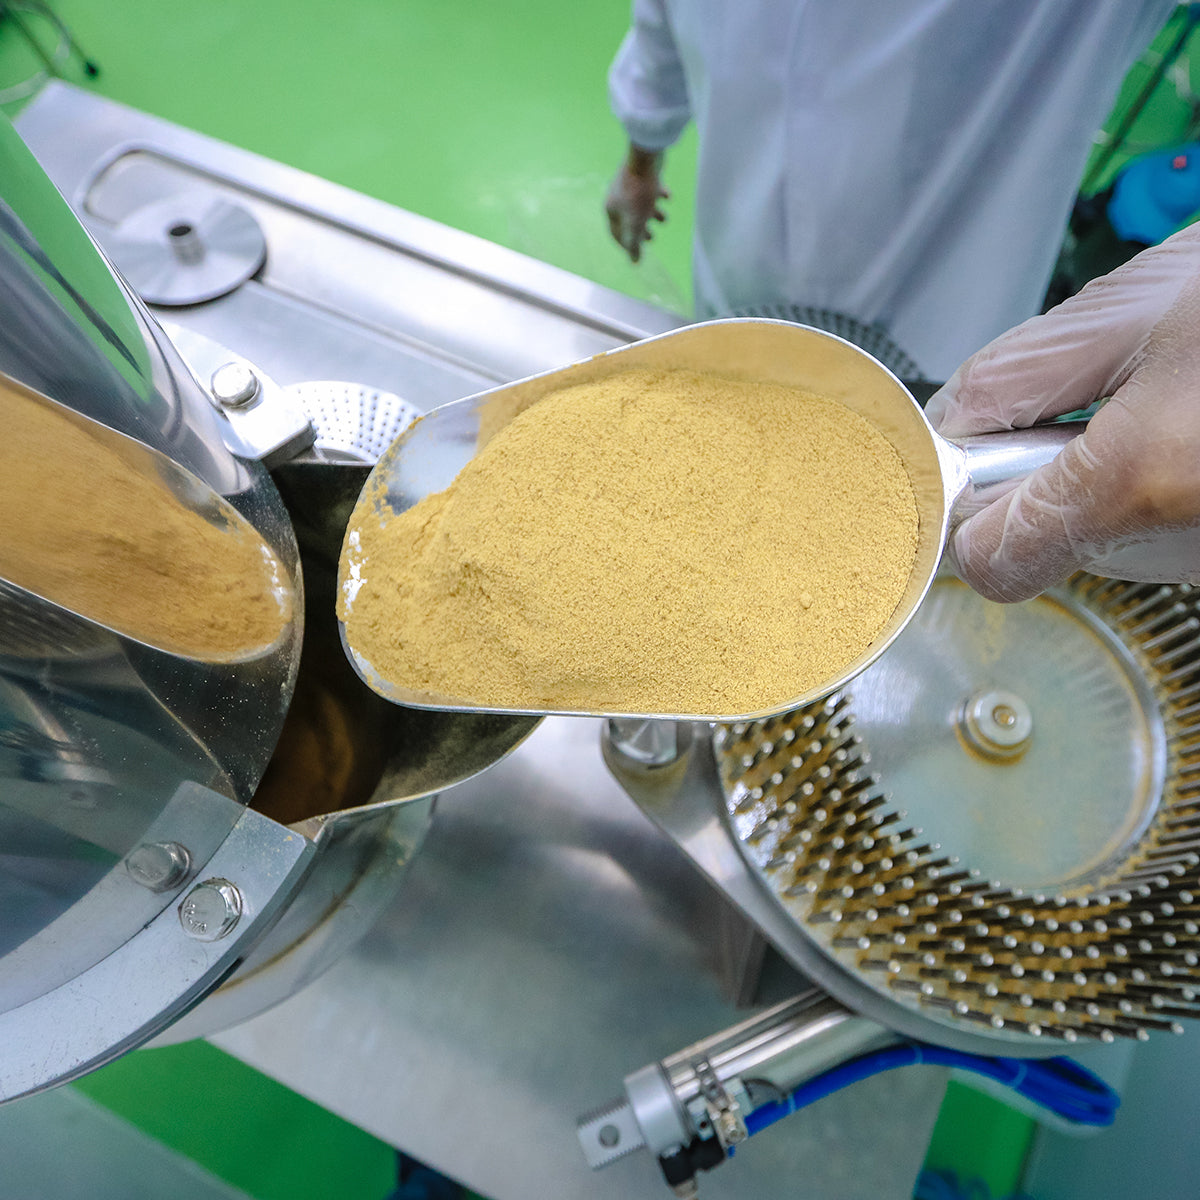 We’re committed to the highest quality ingredients and manufacturing processes